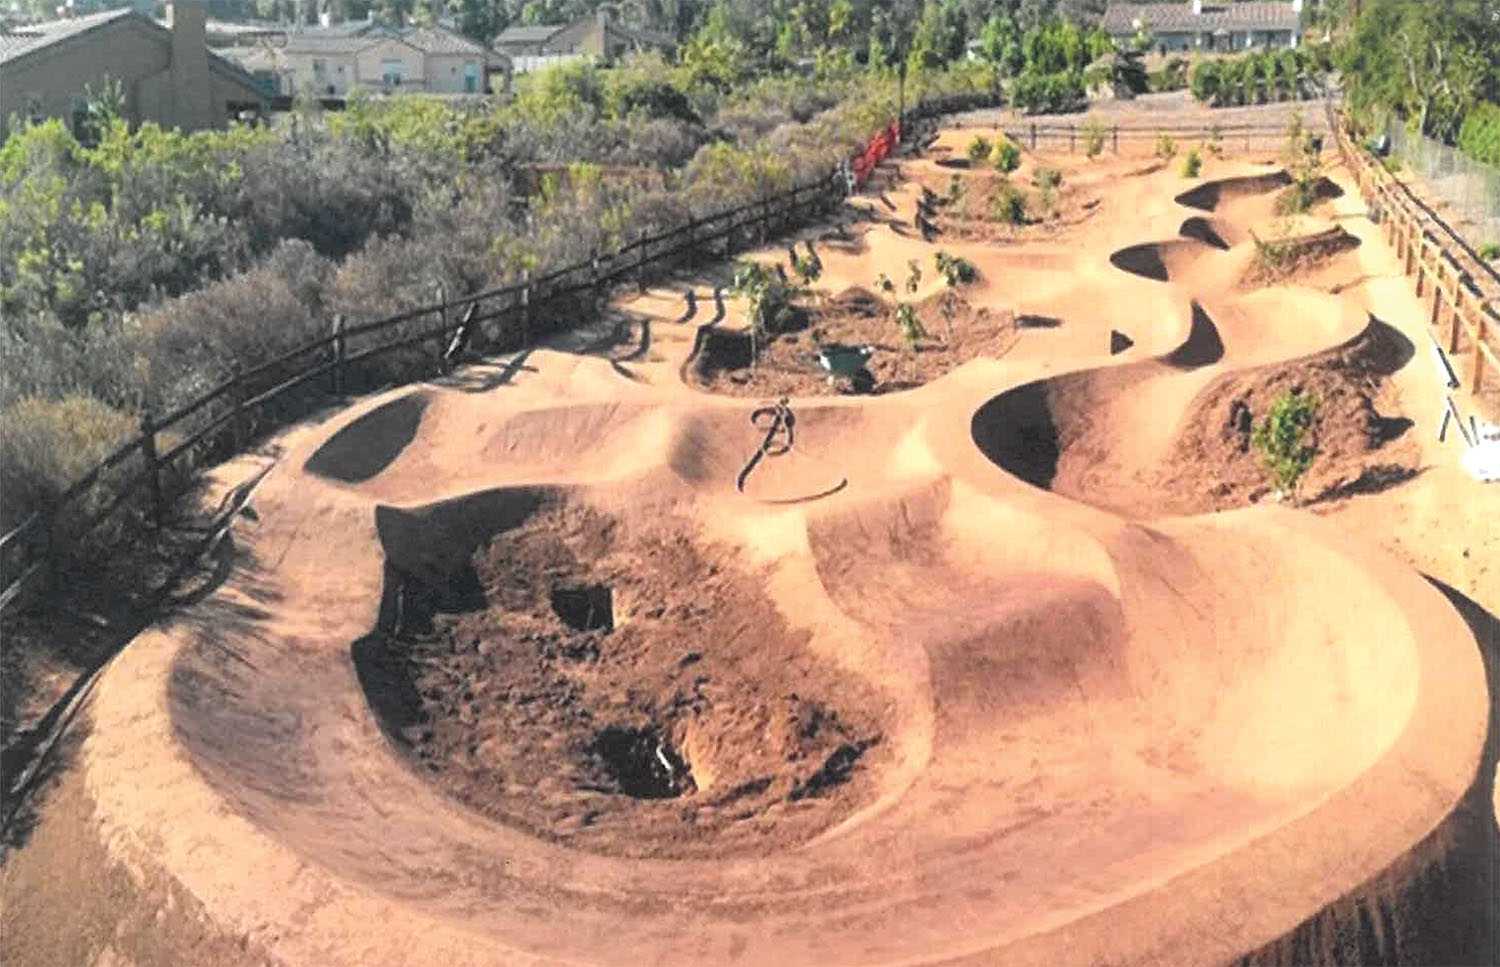 An example of a BMX Pump Track. Moosomin is planning to build a BMX Pump Track at Bradley Park so that kids have a safe and fun place to ride their BMX bikes.